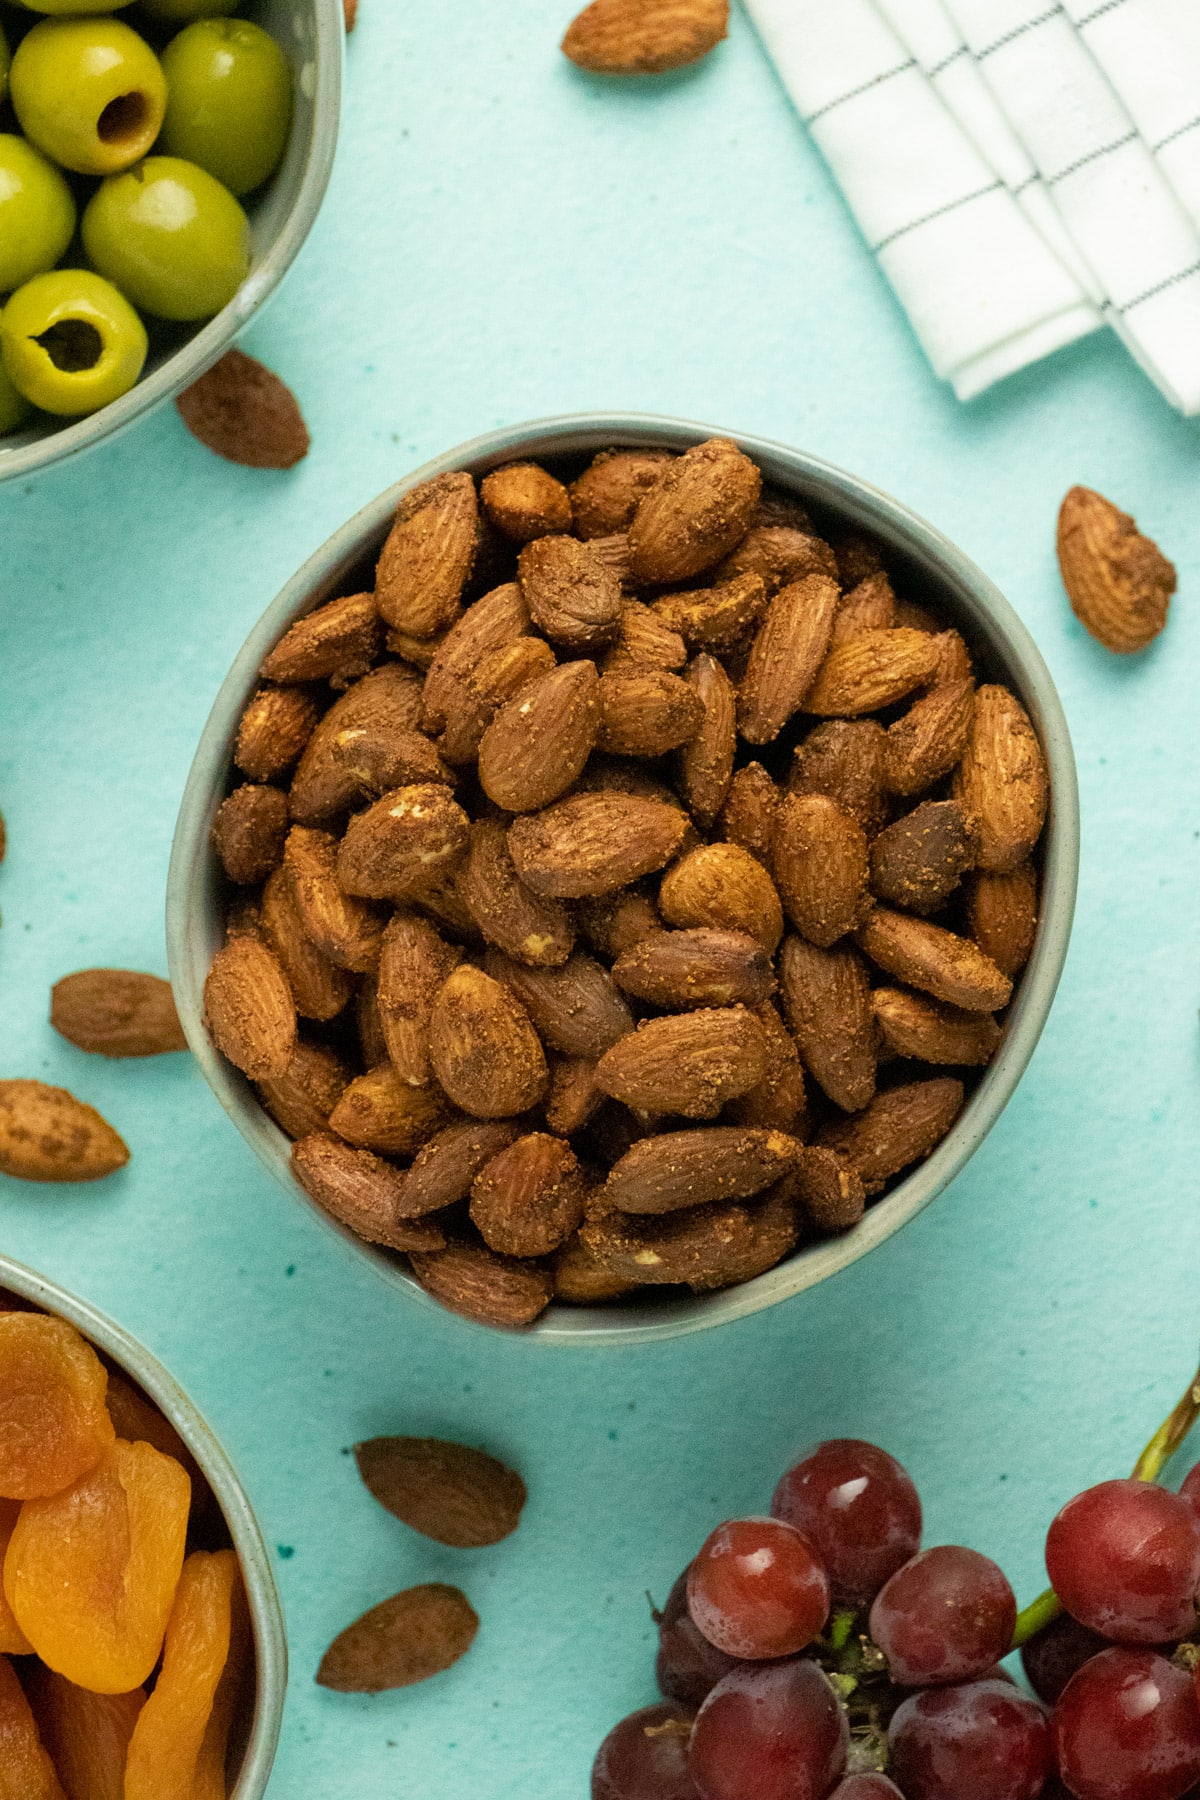 bowl of air fryer roasted almonds as part of a party spread with olives and dried apricots